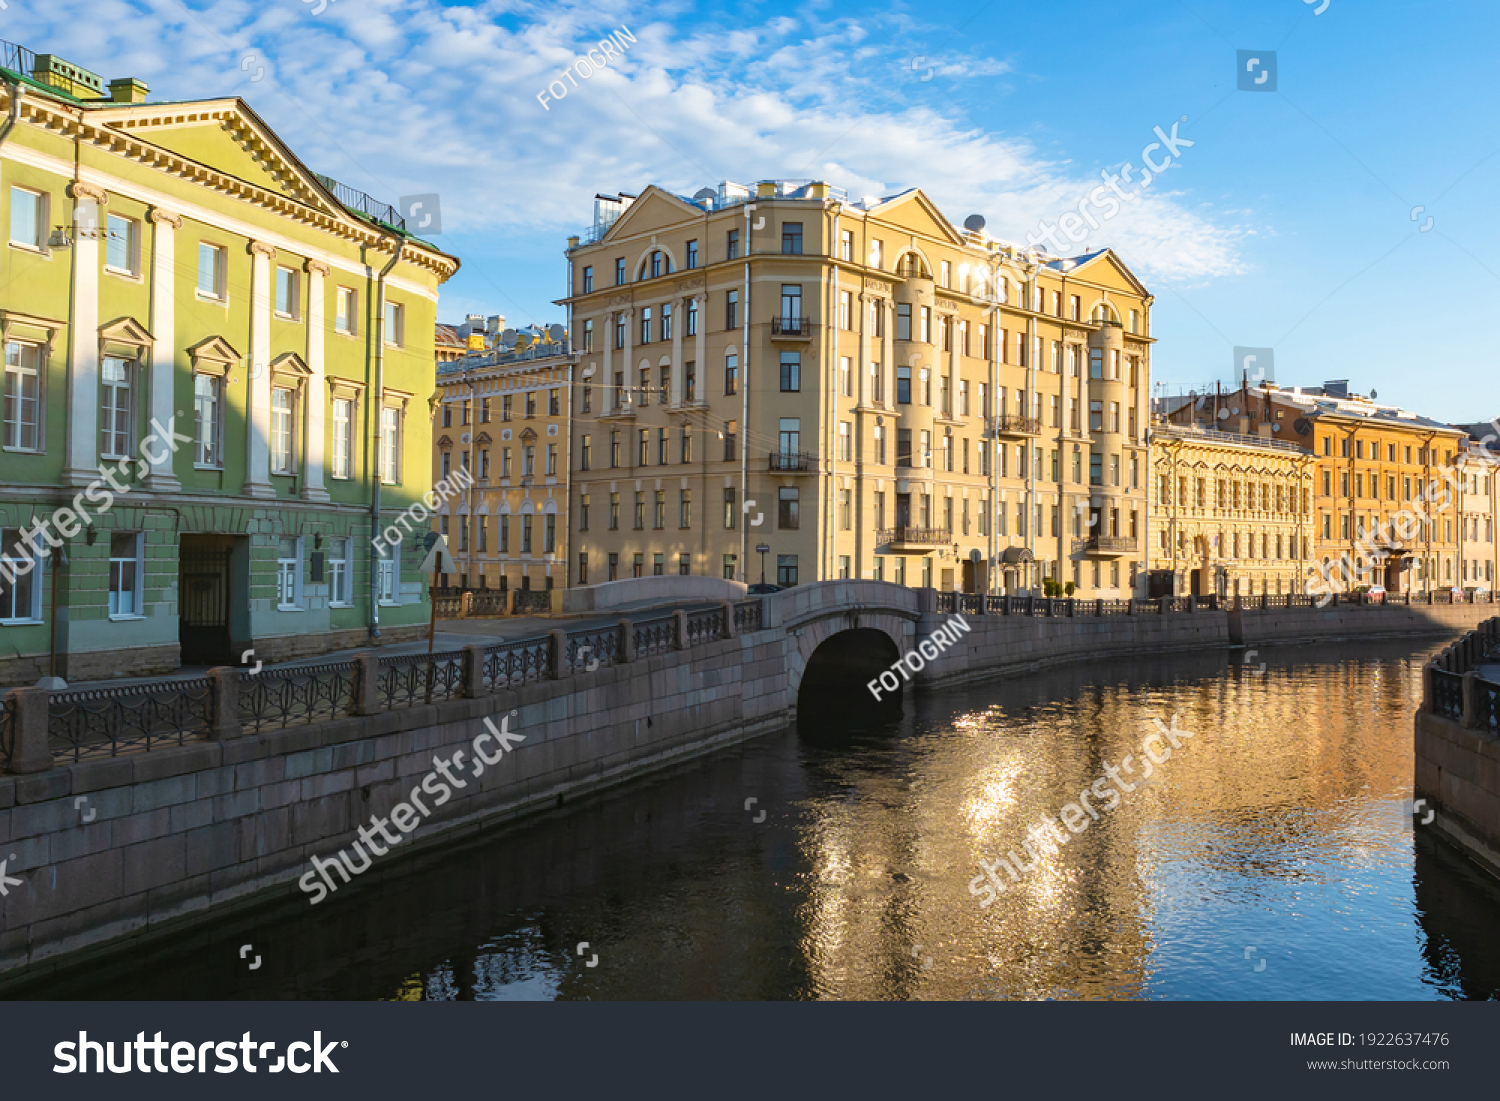 Embankment of Saint Petersburg. Architecture of Russia. Moika river embankment Petersburg. Excursions along rivers of Saint Petersburg. Russian city on a summer day. Tourism in Russia. #1922637476